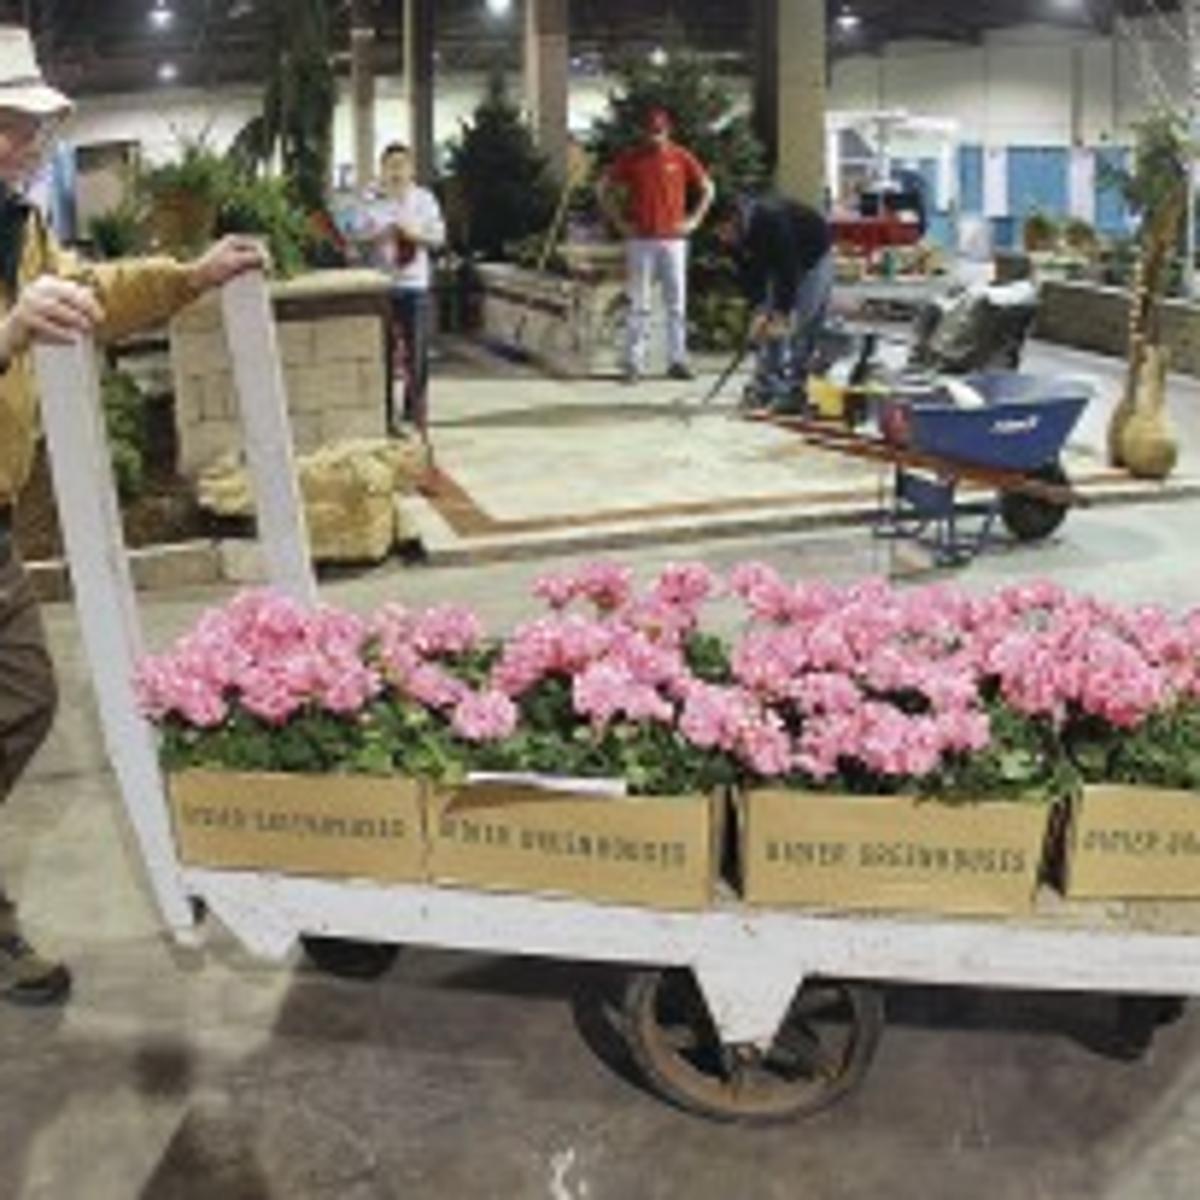 flower show sprouts with landscaping ideas | local news | qctimes